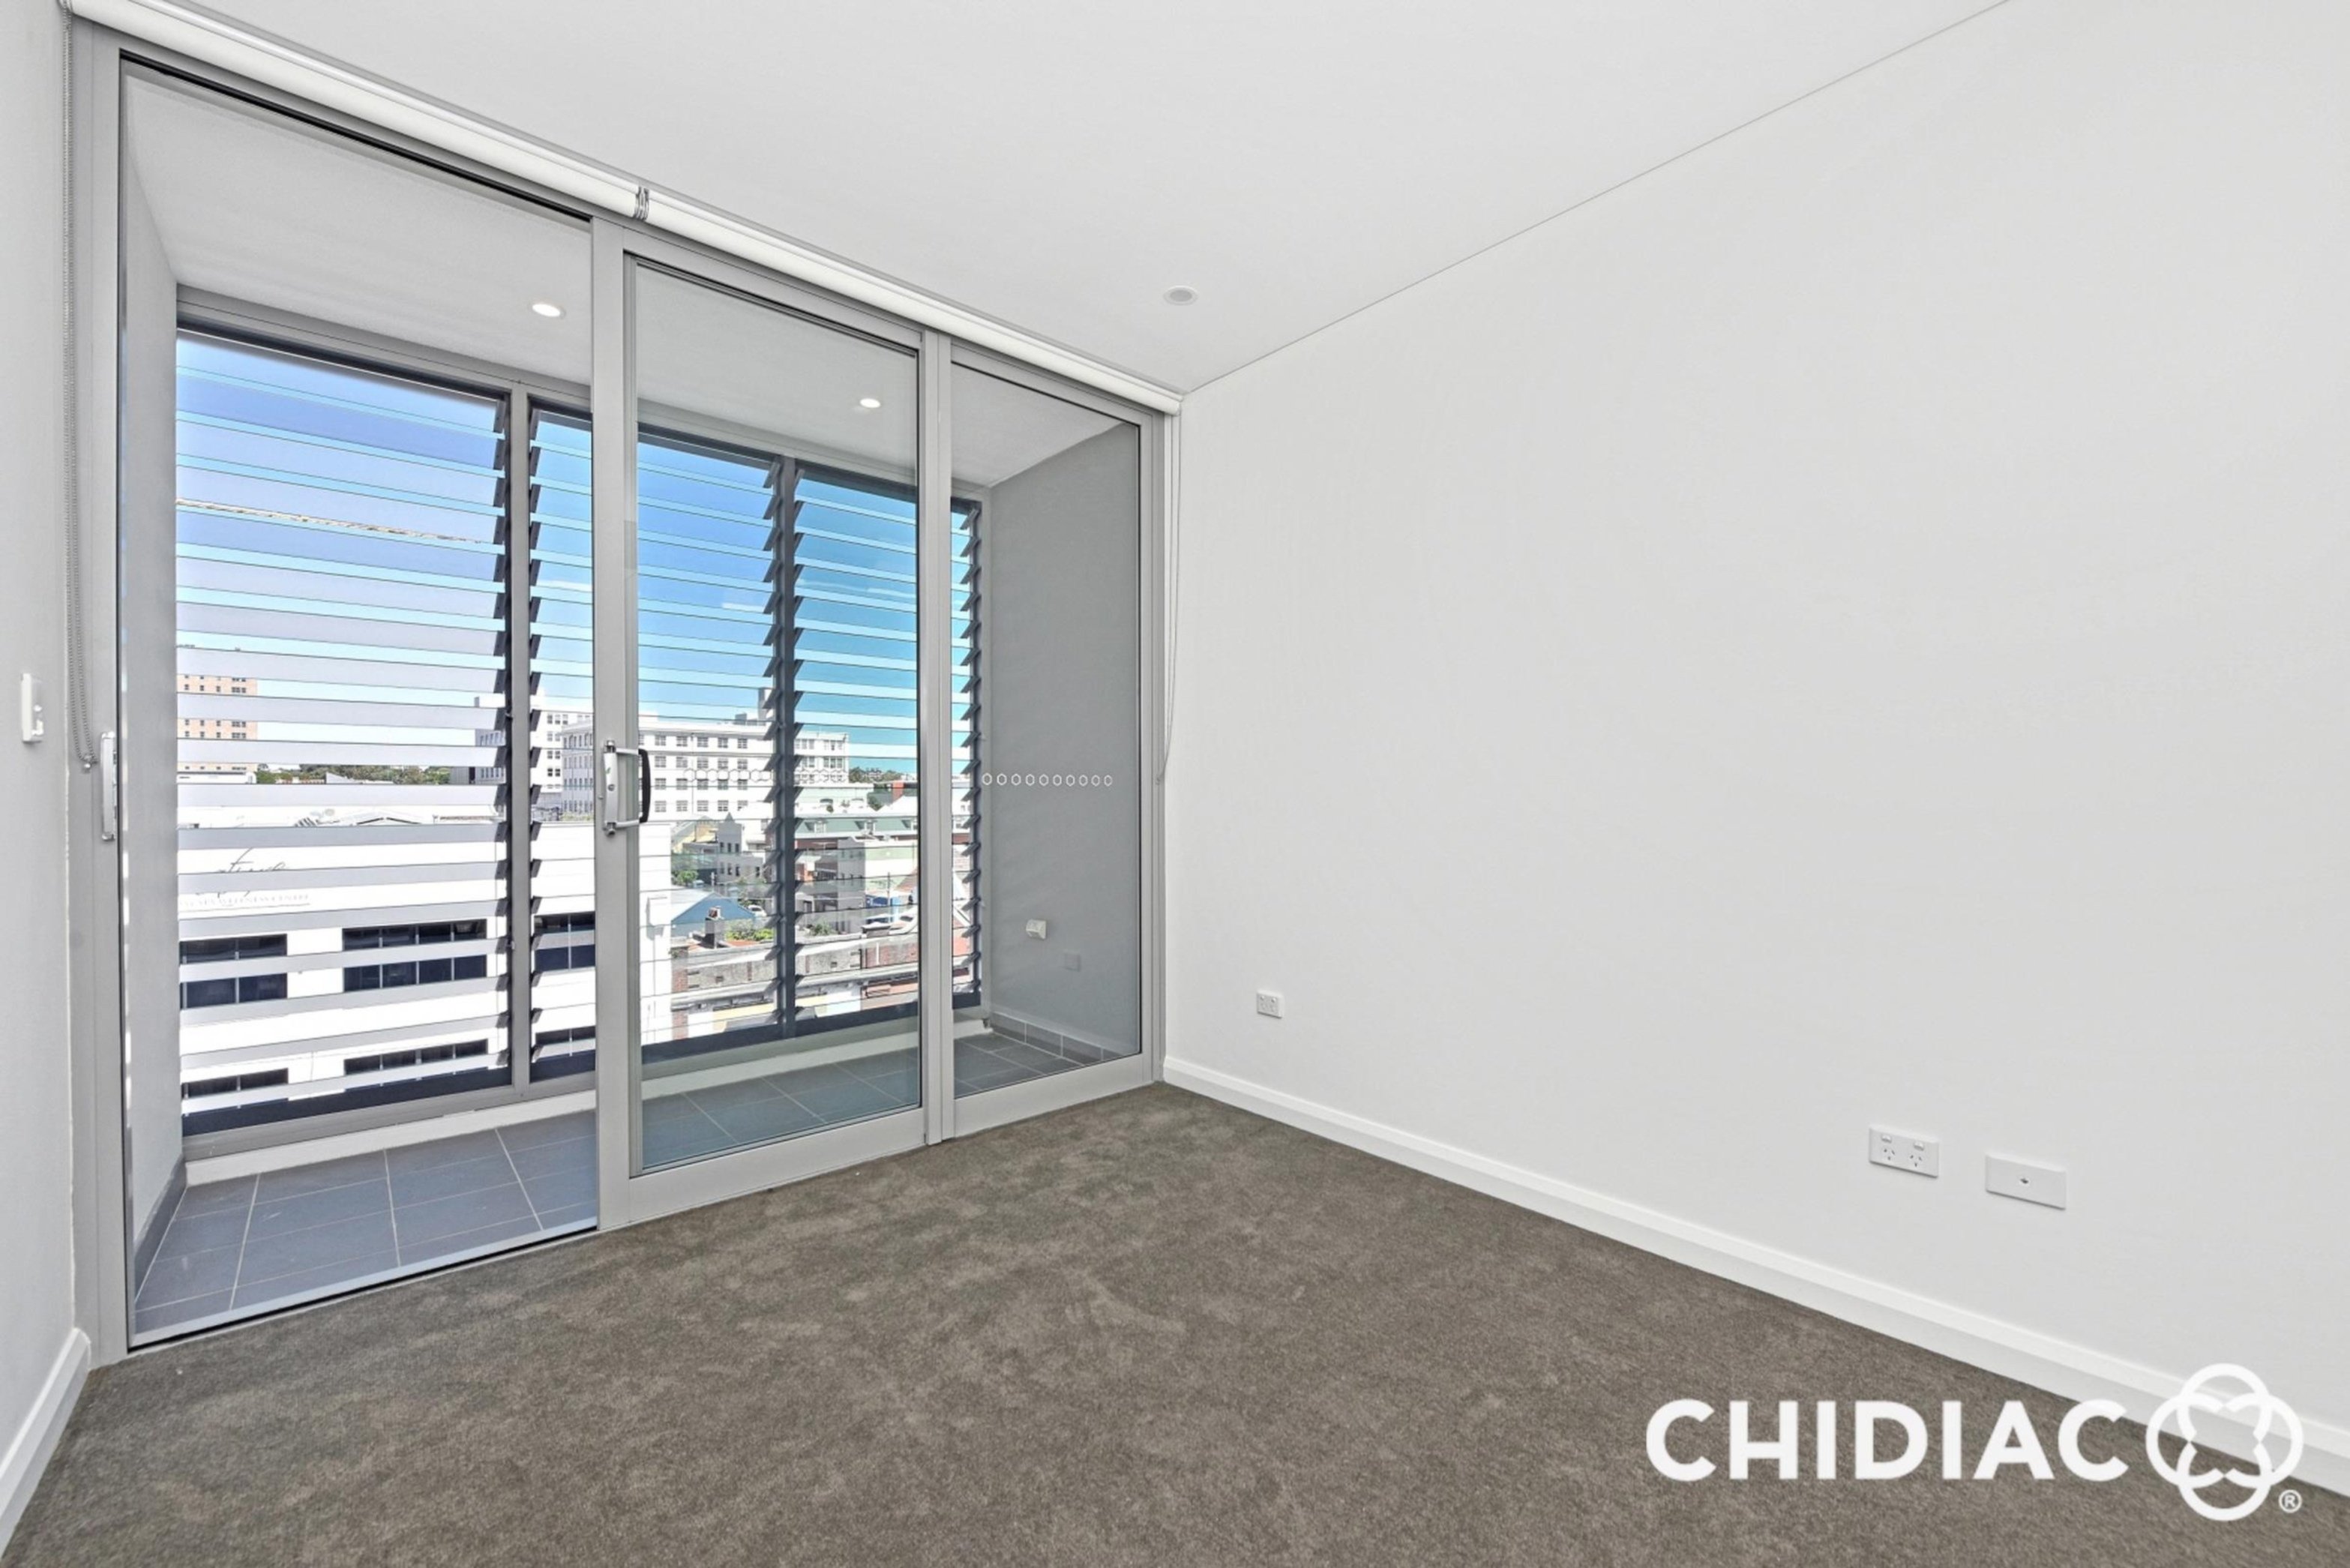 403/5 Purkis Street, Camperdown Leased by Chidiac Realty - image 5